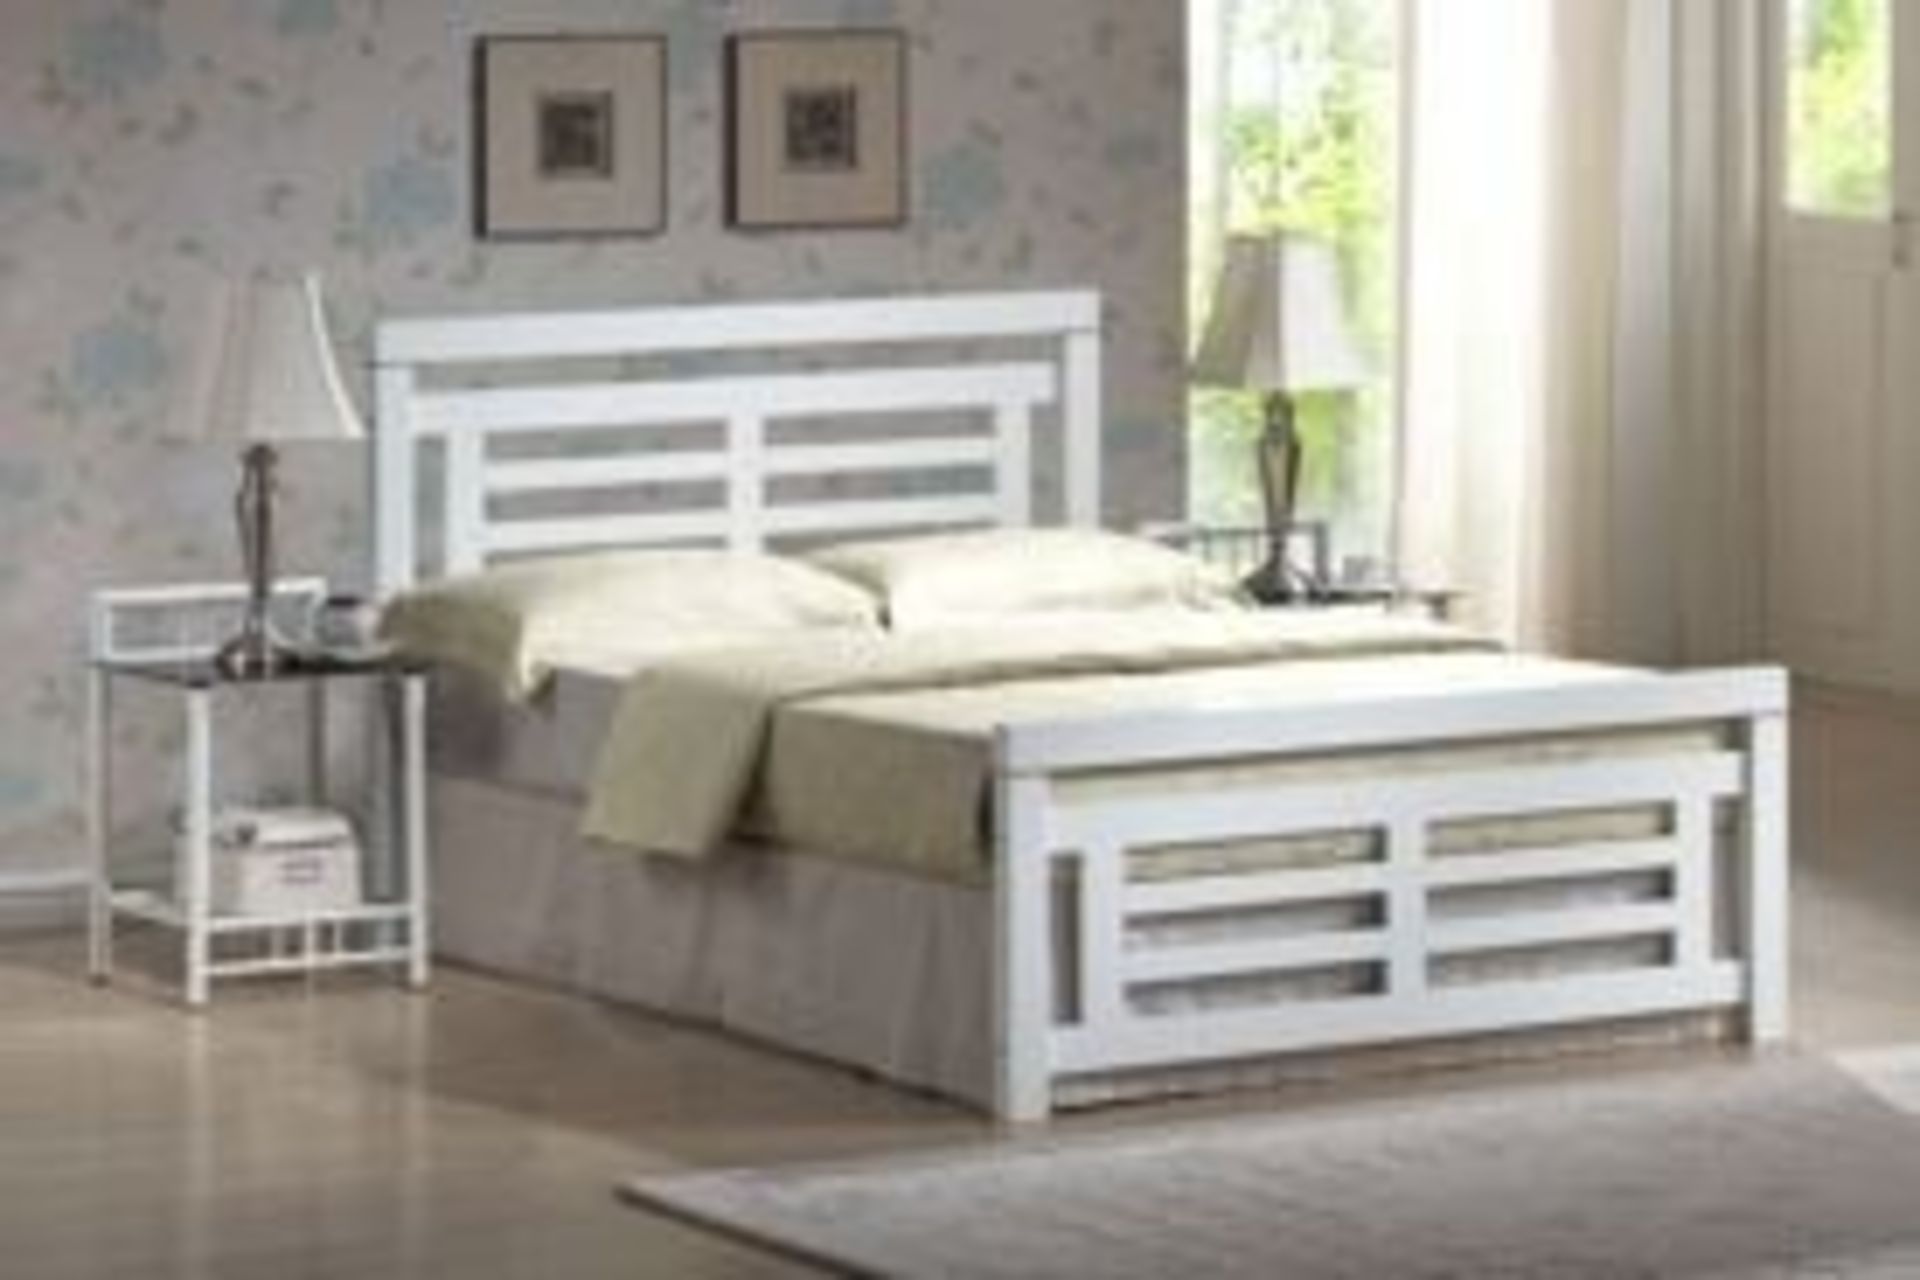 Brand New and Boxed King-size Colorado Bed (White)